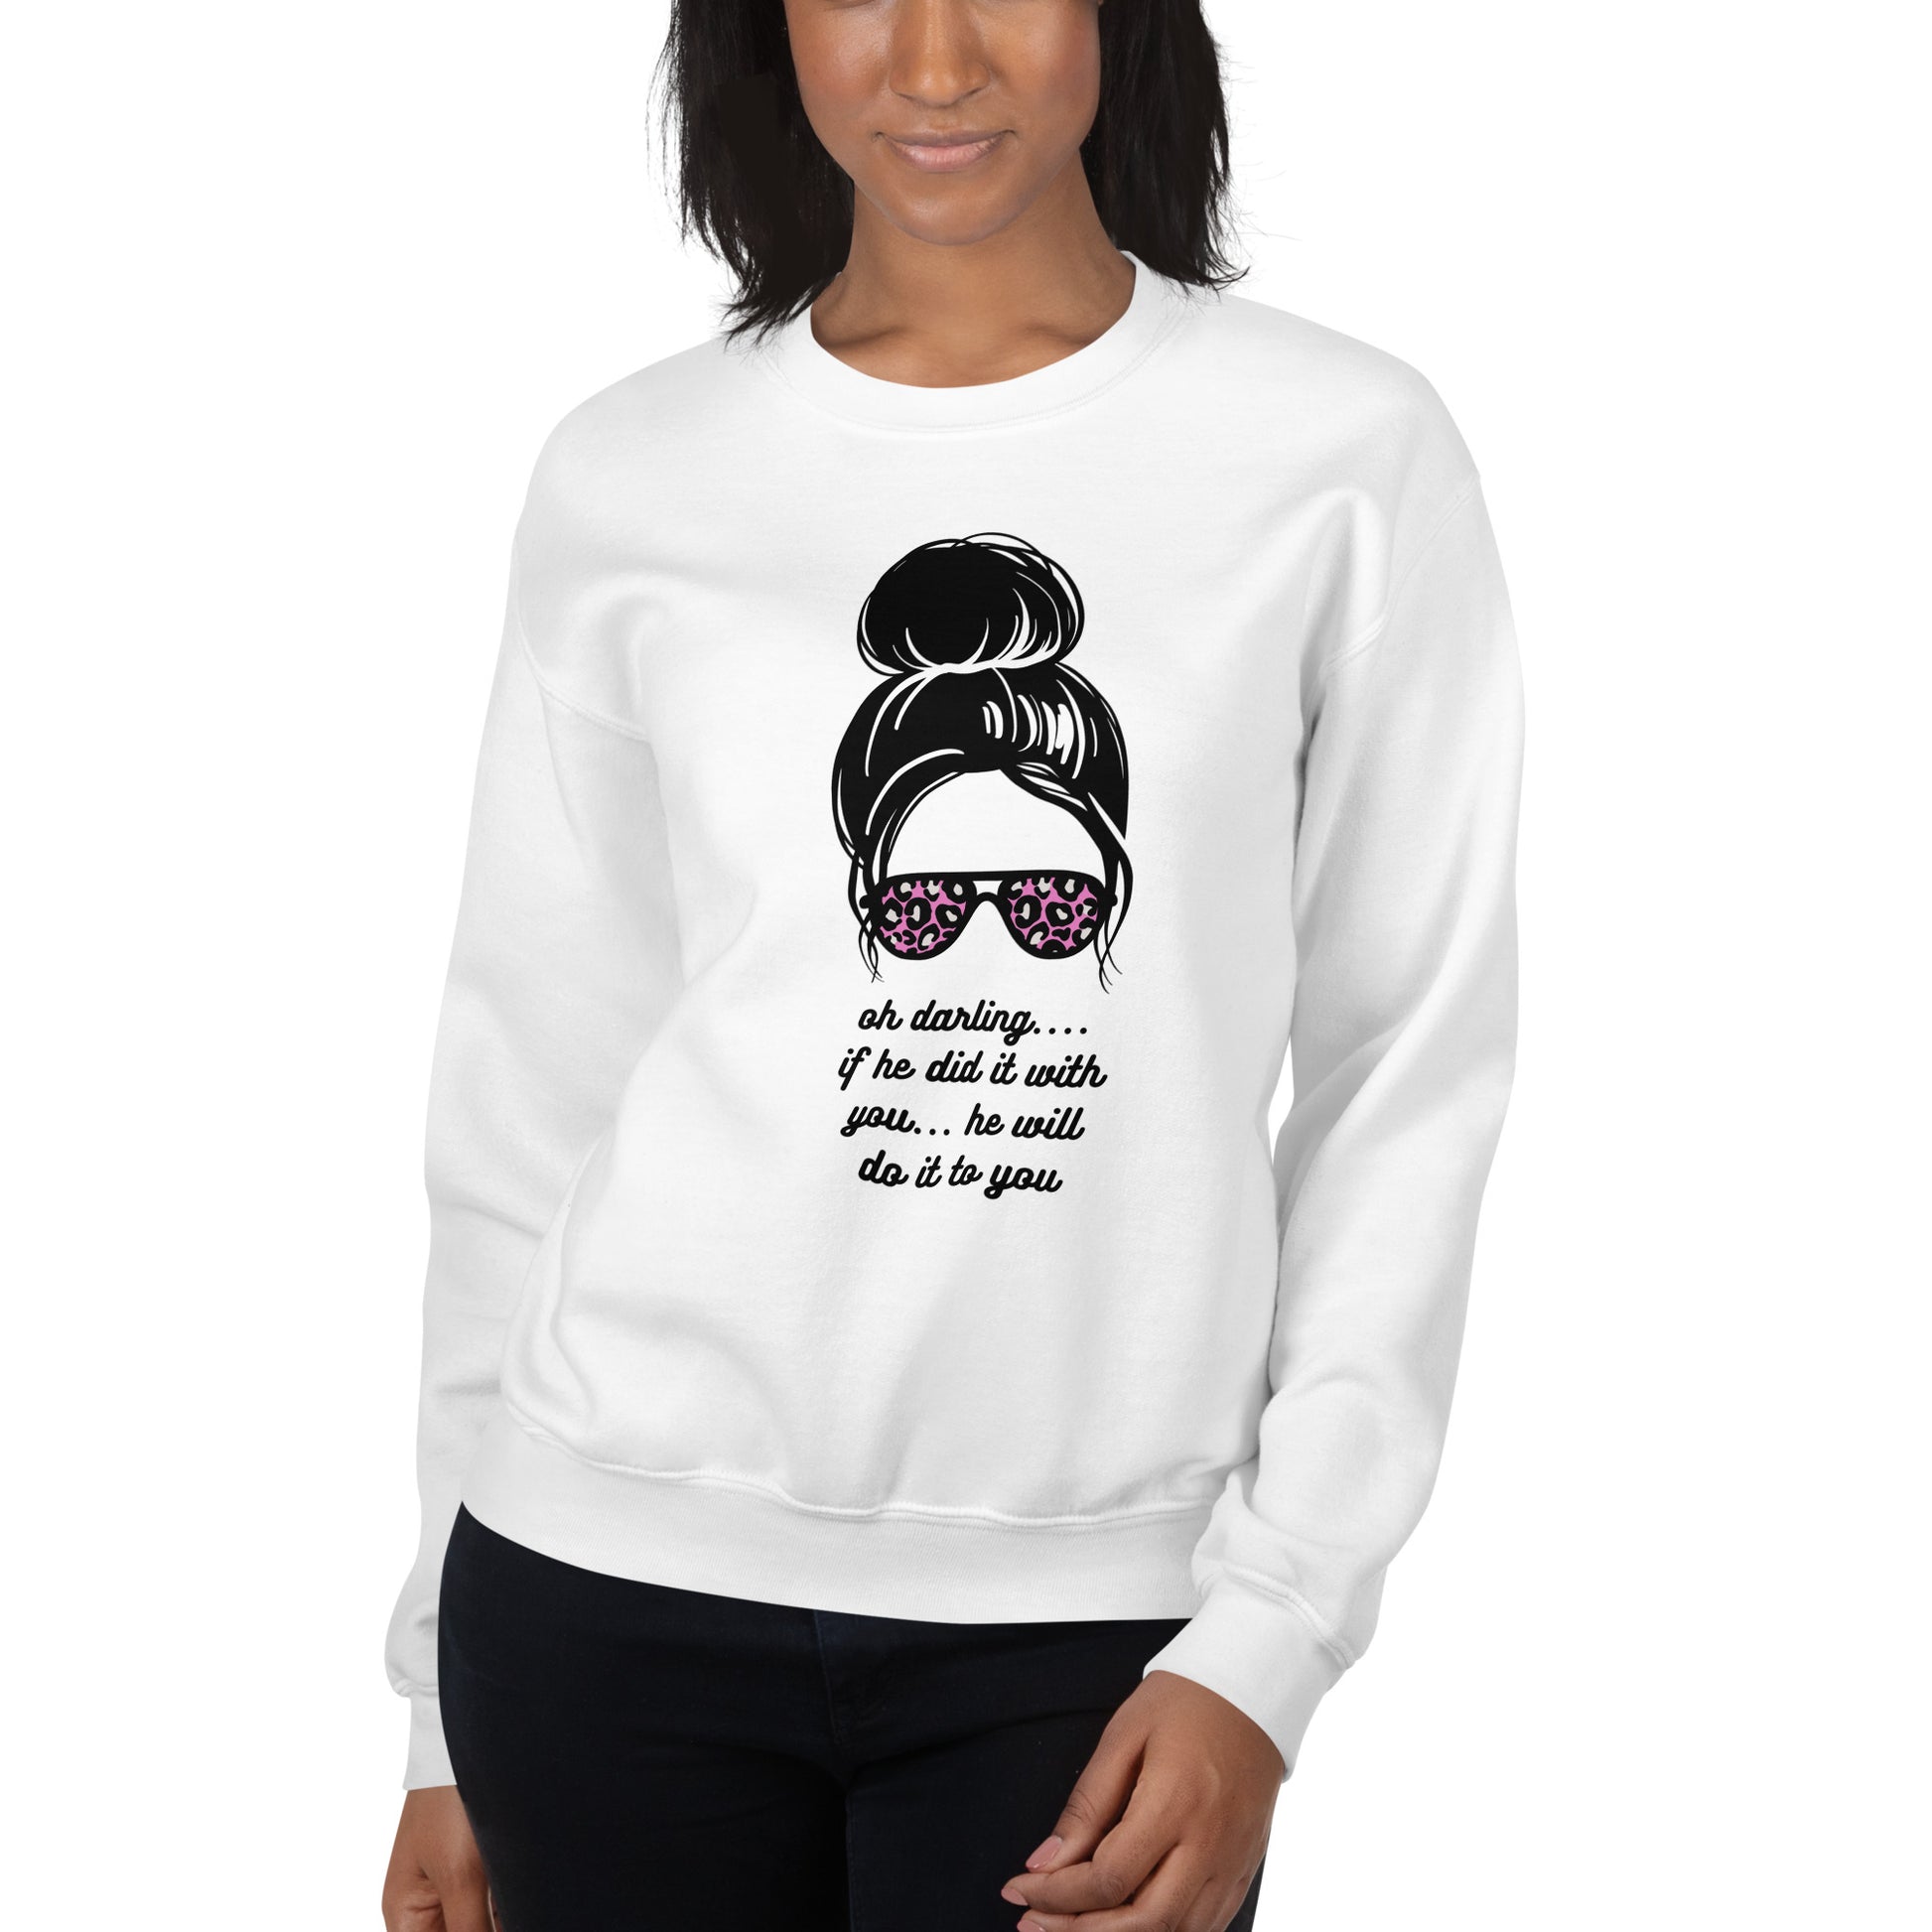 Unisex Sweatshirt - Oh Darling - If He Did it With You He'll Do It To You Sweatshirt Stylin' Spirit White S 